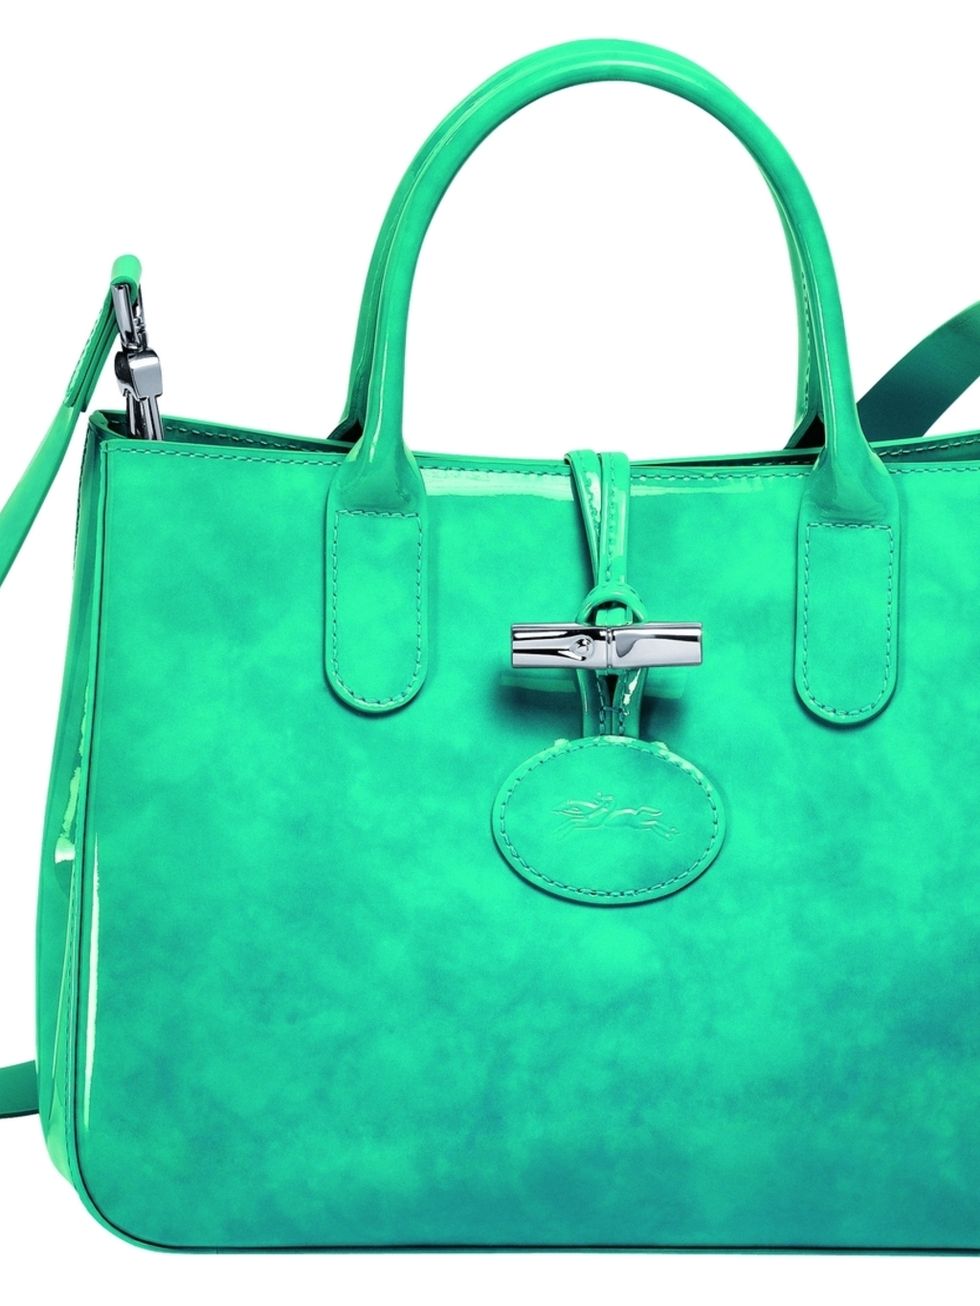 Product, Green, Bag, White, Fashion accessory, Style, Teal, Turquoise, Luggage and bags, Shoulder bag, 